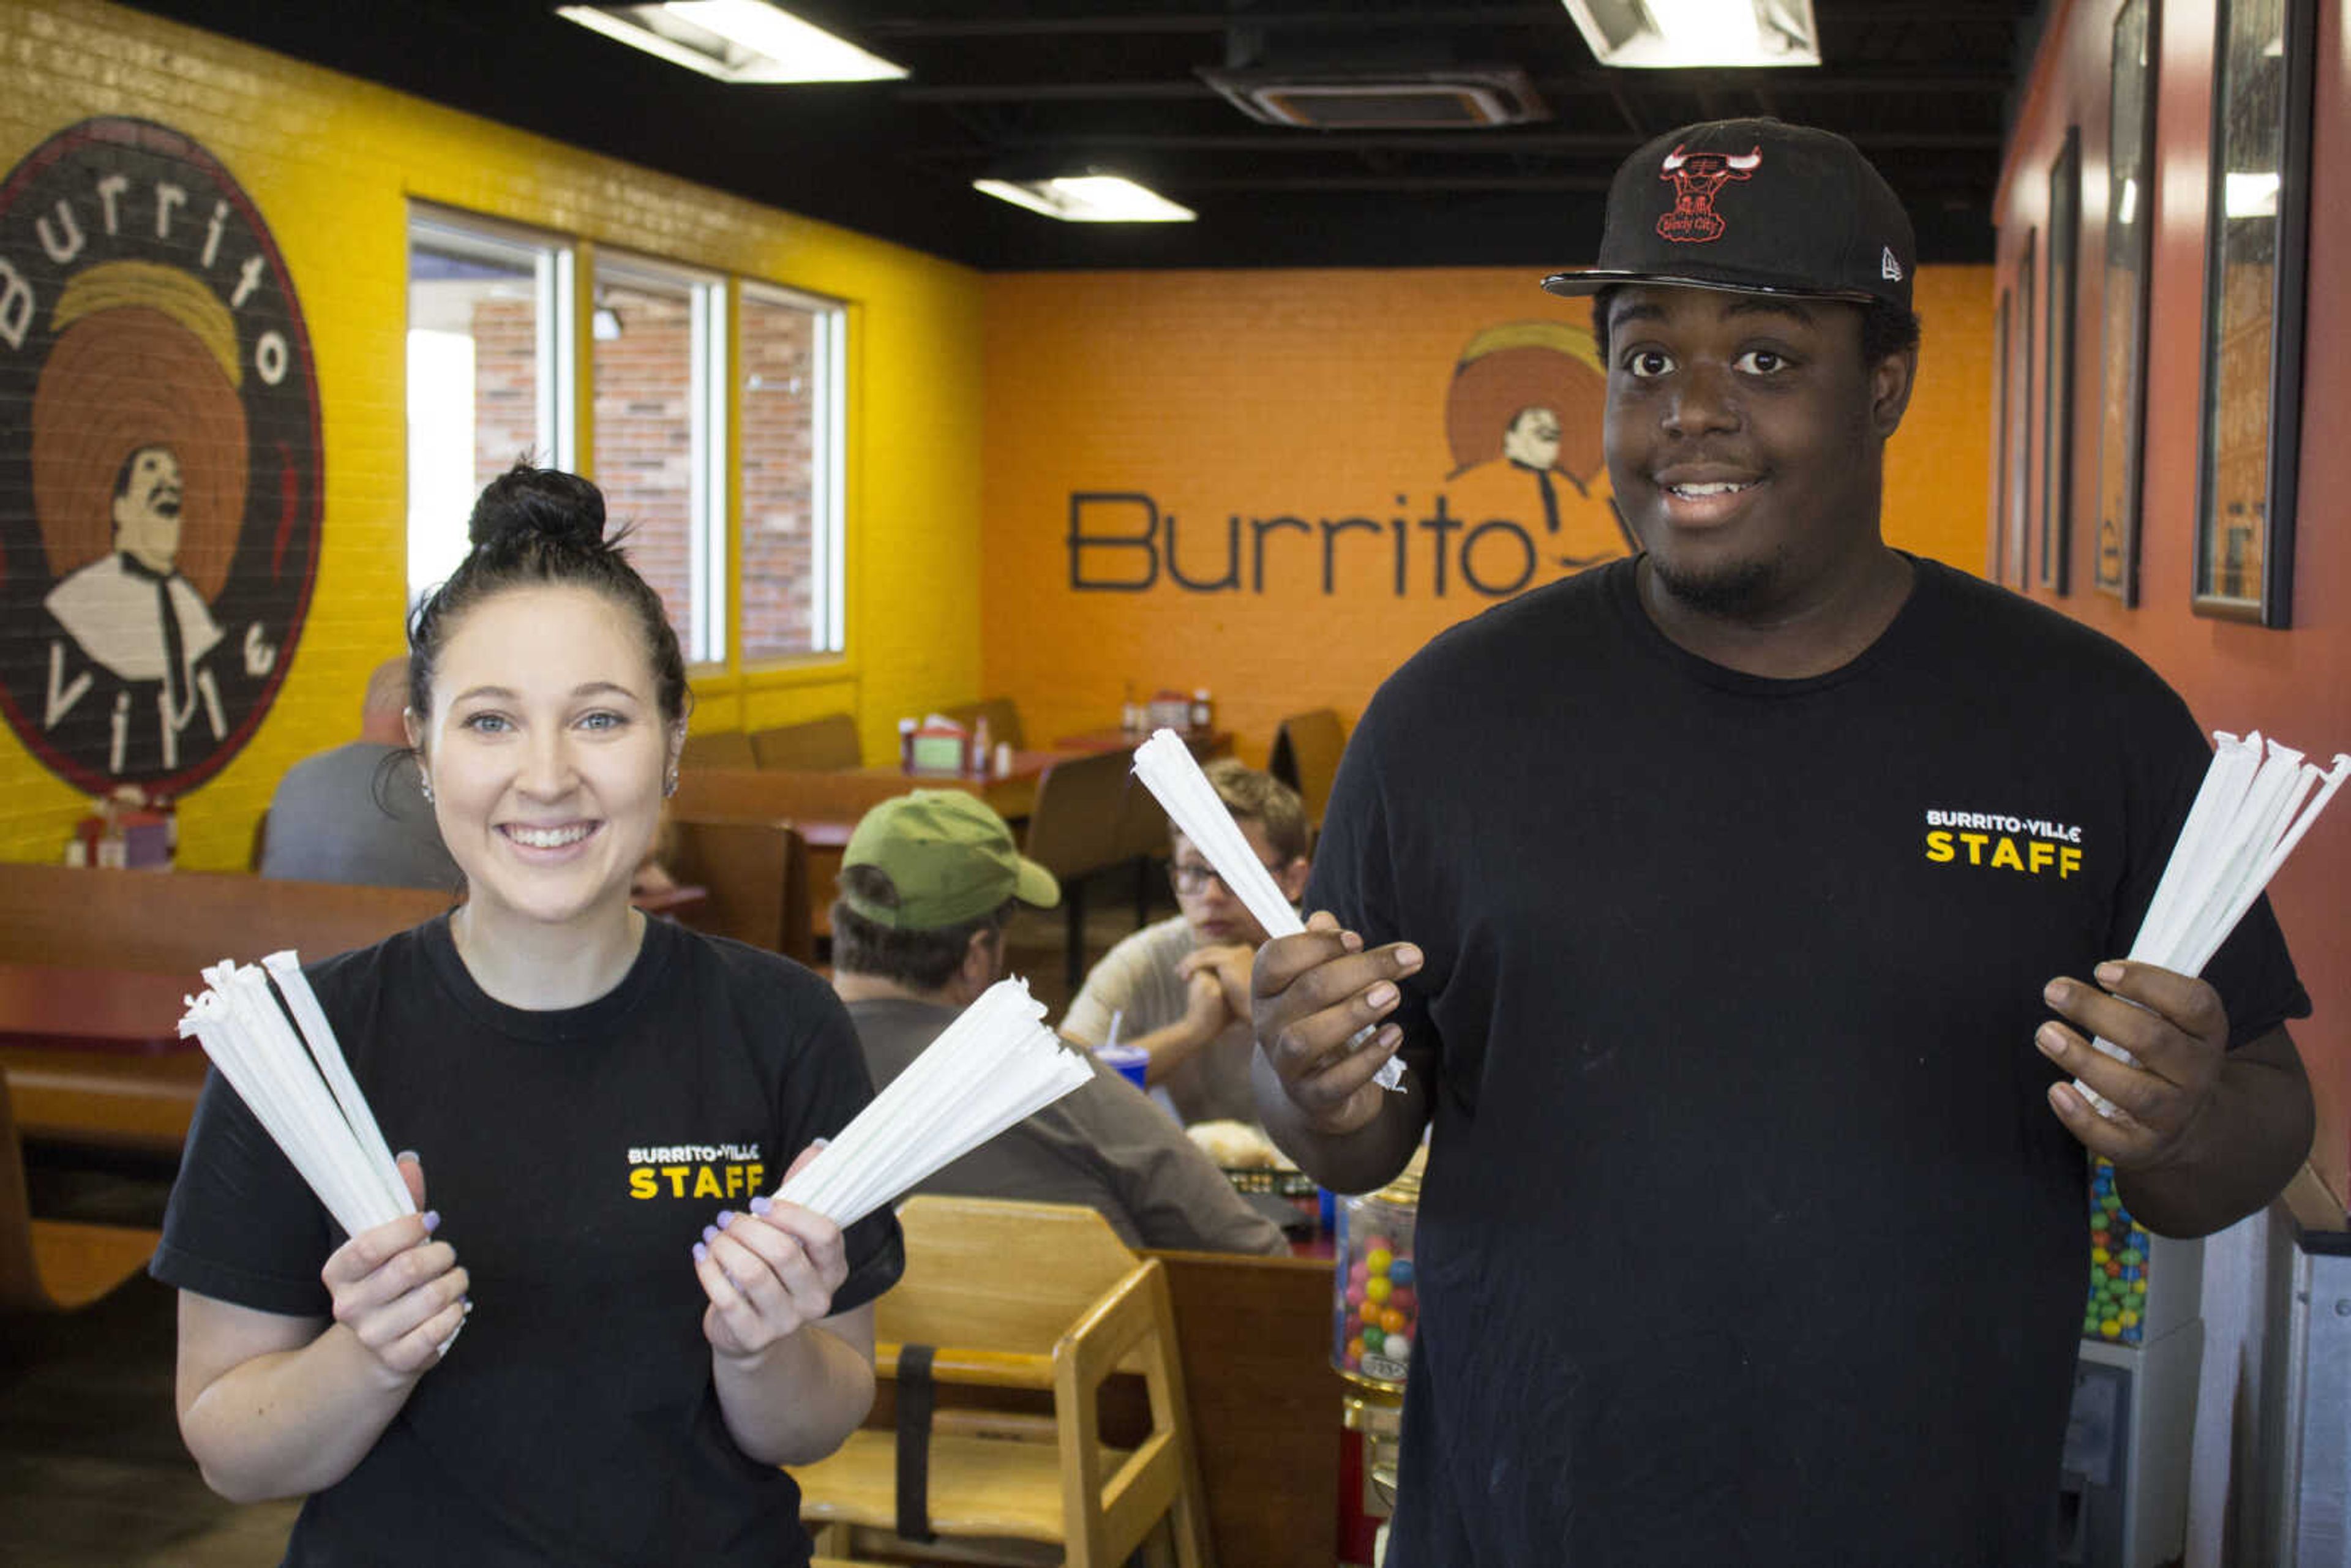 Burrito-Ville staffers Michael Reece and Anastasia Fundis promoting the new biodegradable straws.